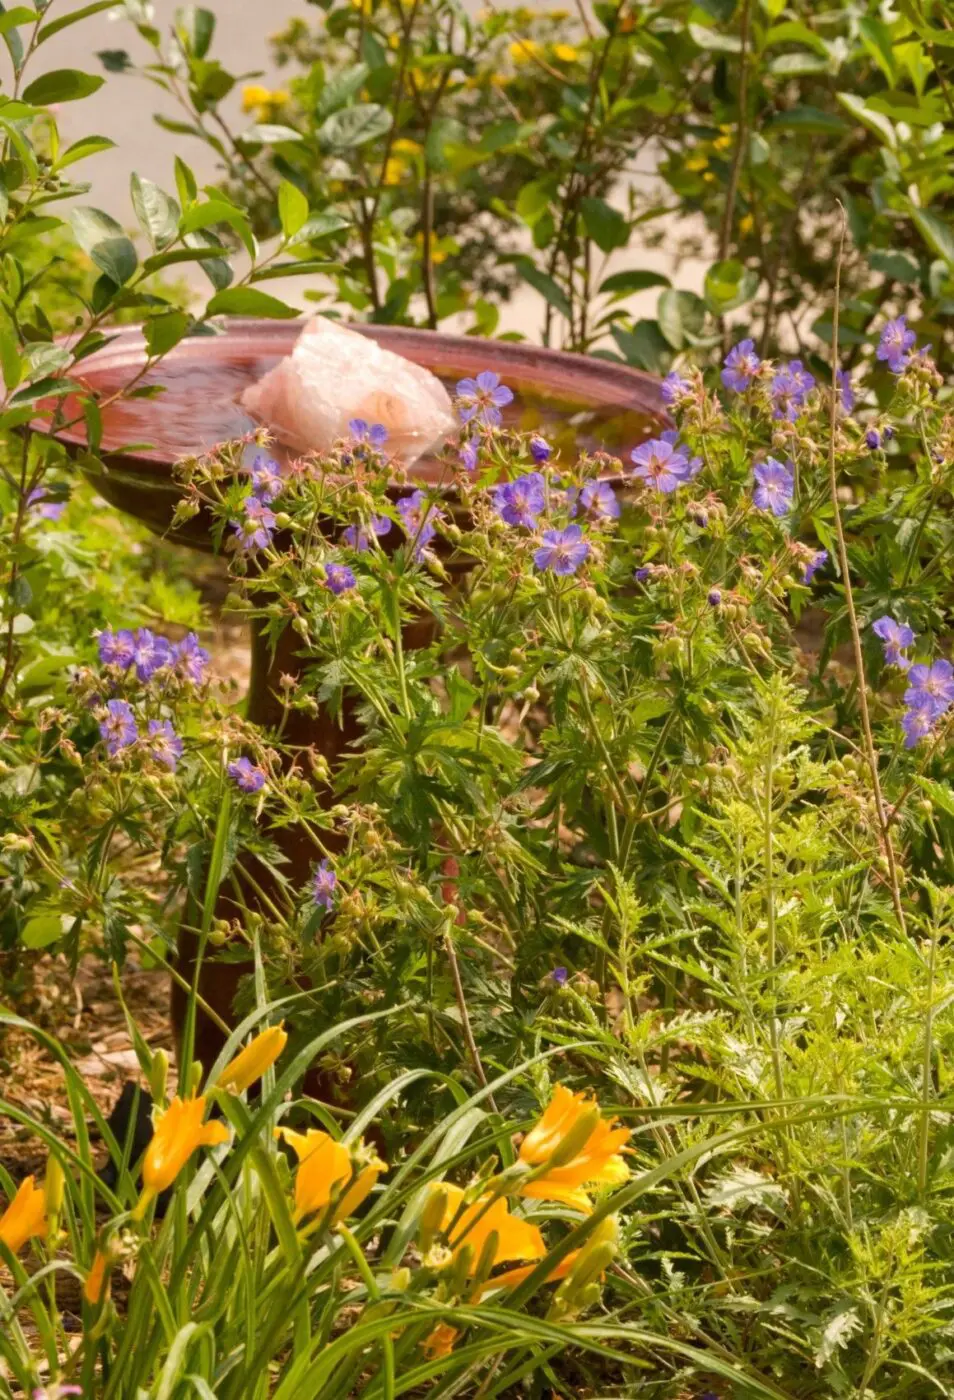 A pink bird perches on the edge of a bird bath surrounded by lush greenery and vibrant flowers, a striking contrast to the typical desert landscaping seen in East Valley. The foreground features blooming yellow and purple flowers, adding a splash of color to this oasis-like garden scene.